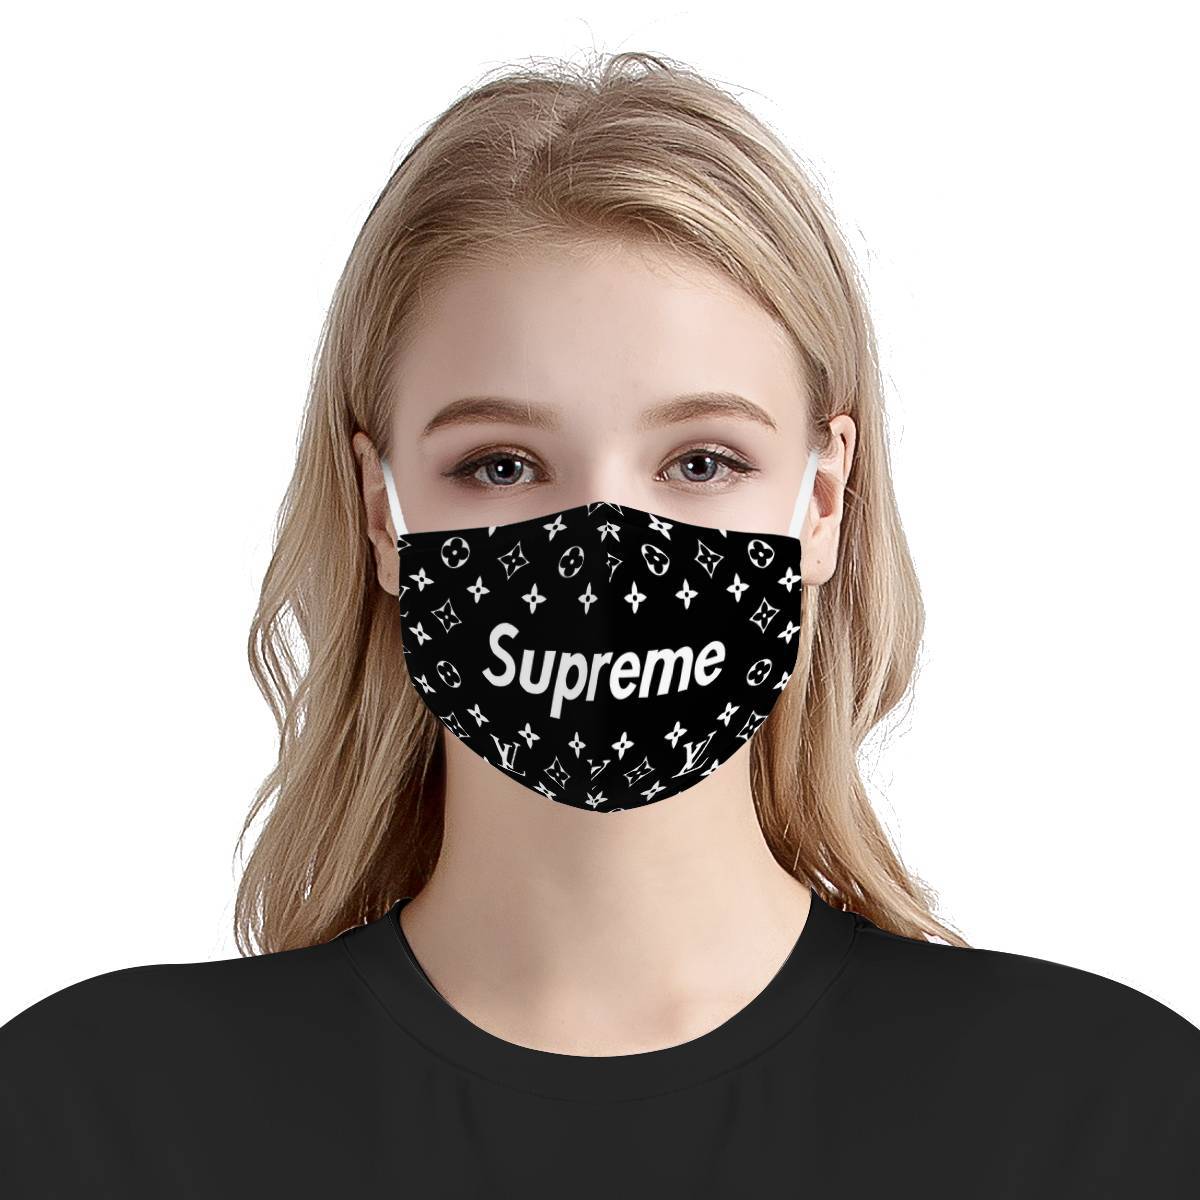 Supreme Black Face Mask + Filters Pm2.5 Face Mask - Decor Your Home